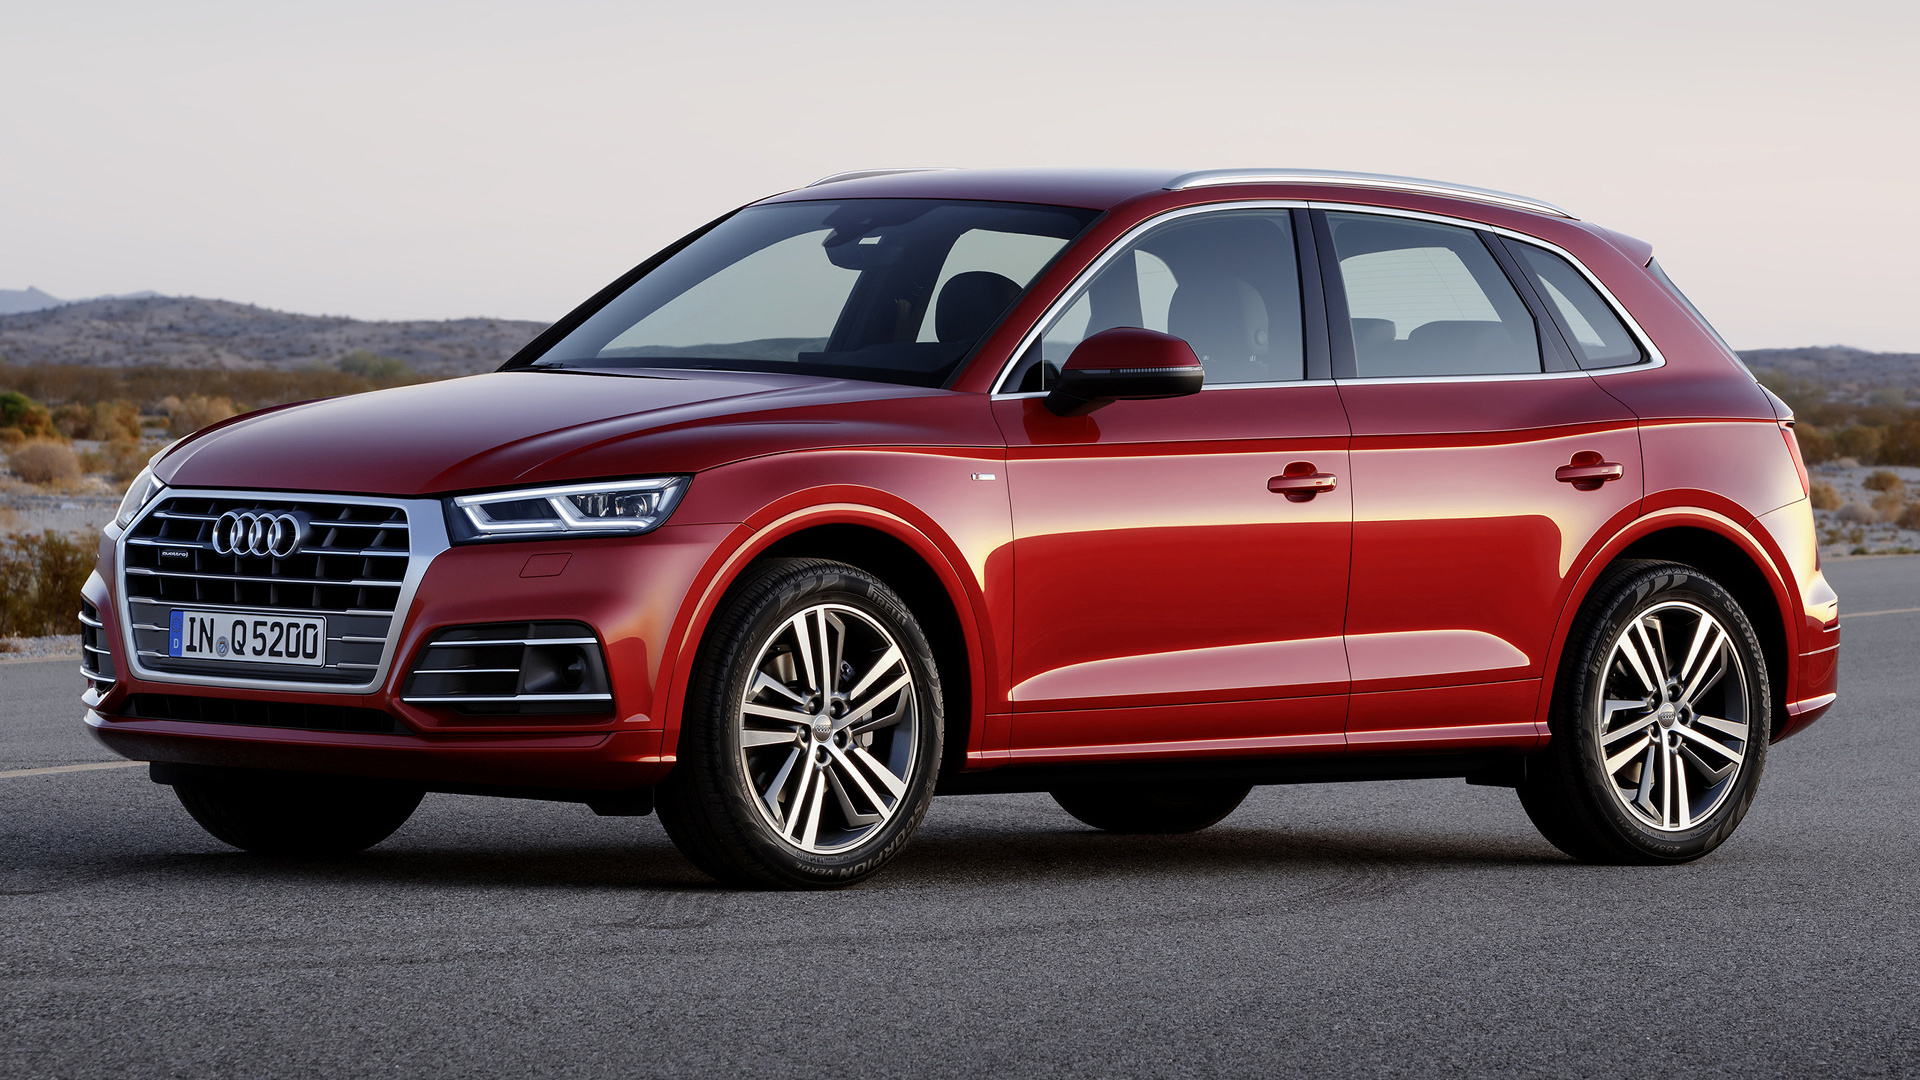 2017 Audi Q5 S line - Wallpapers and HD Images | Car Pixel